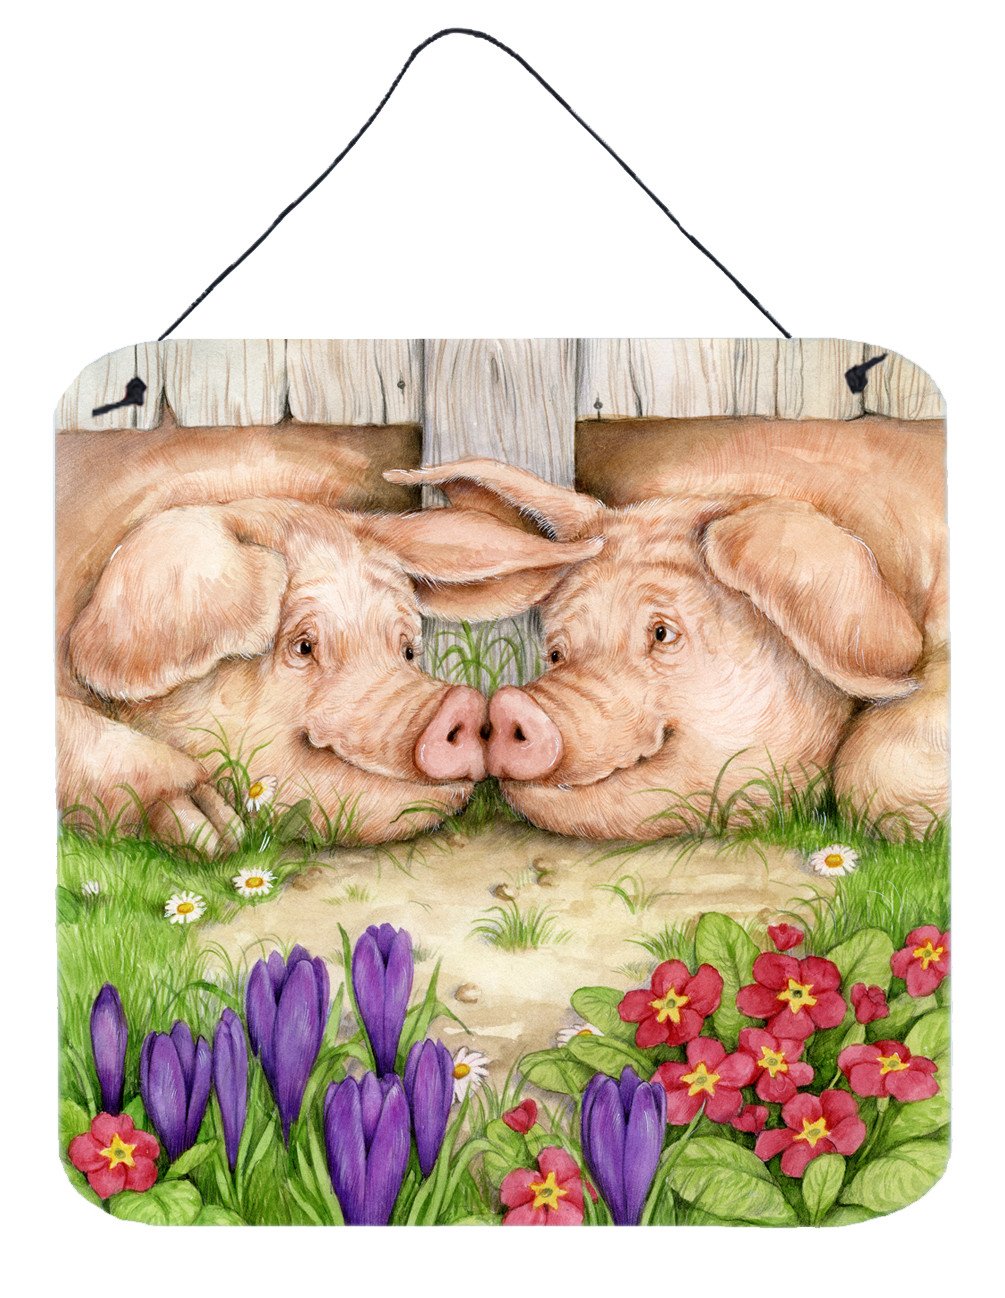 Pigs Nose To Nose by Debbie Cook Wall or Door Hanging Prints CDCO0350DS66 by Caroline's Treasures